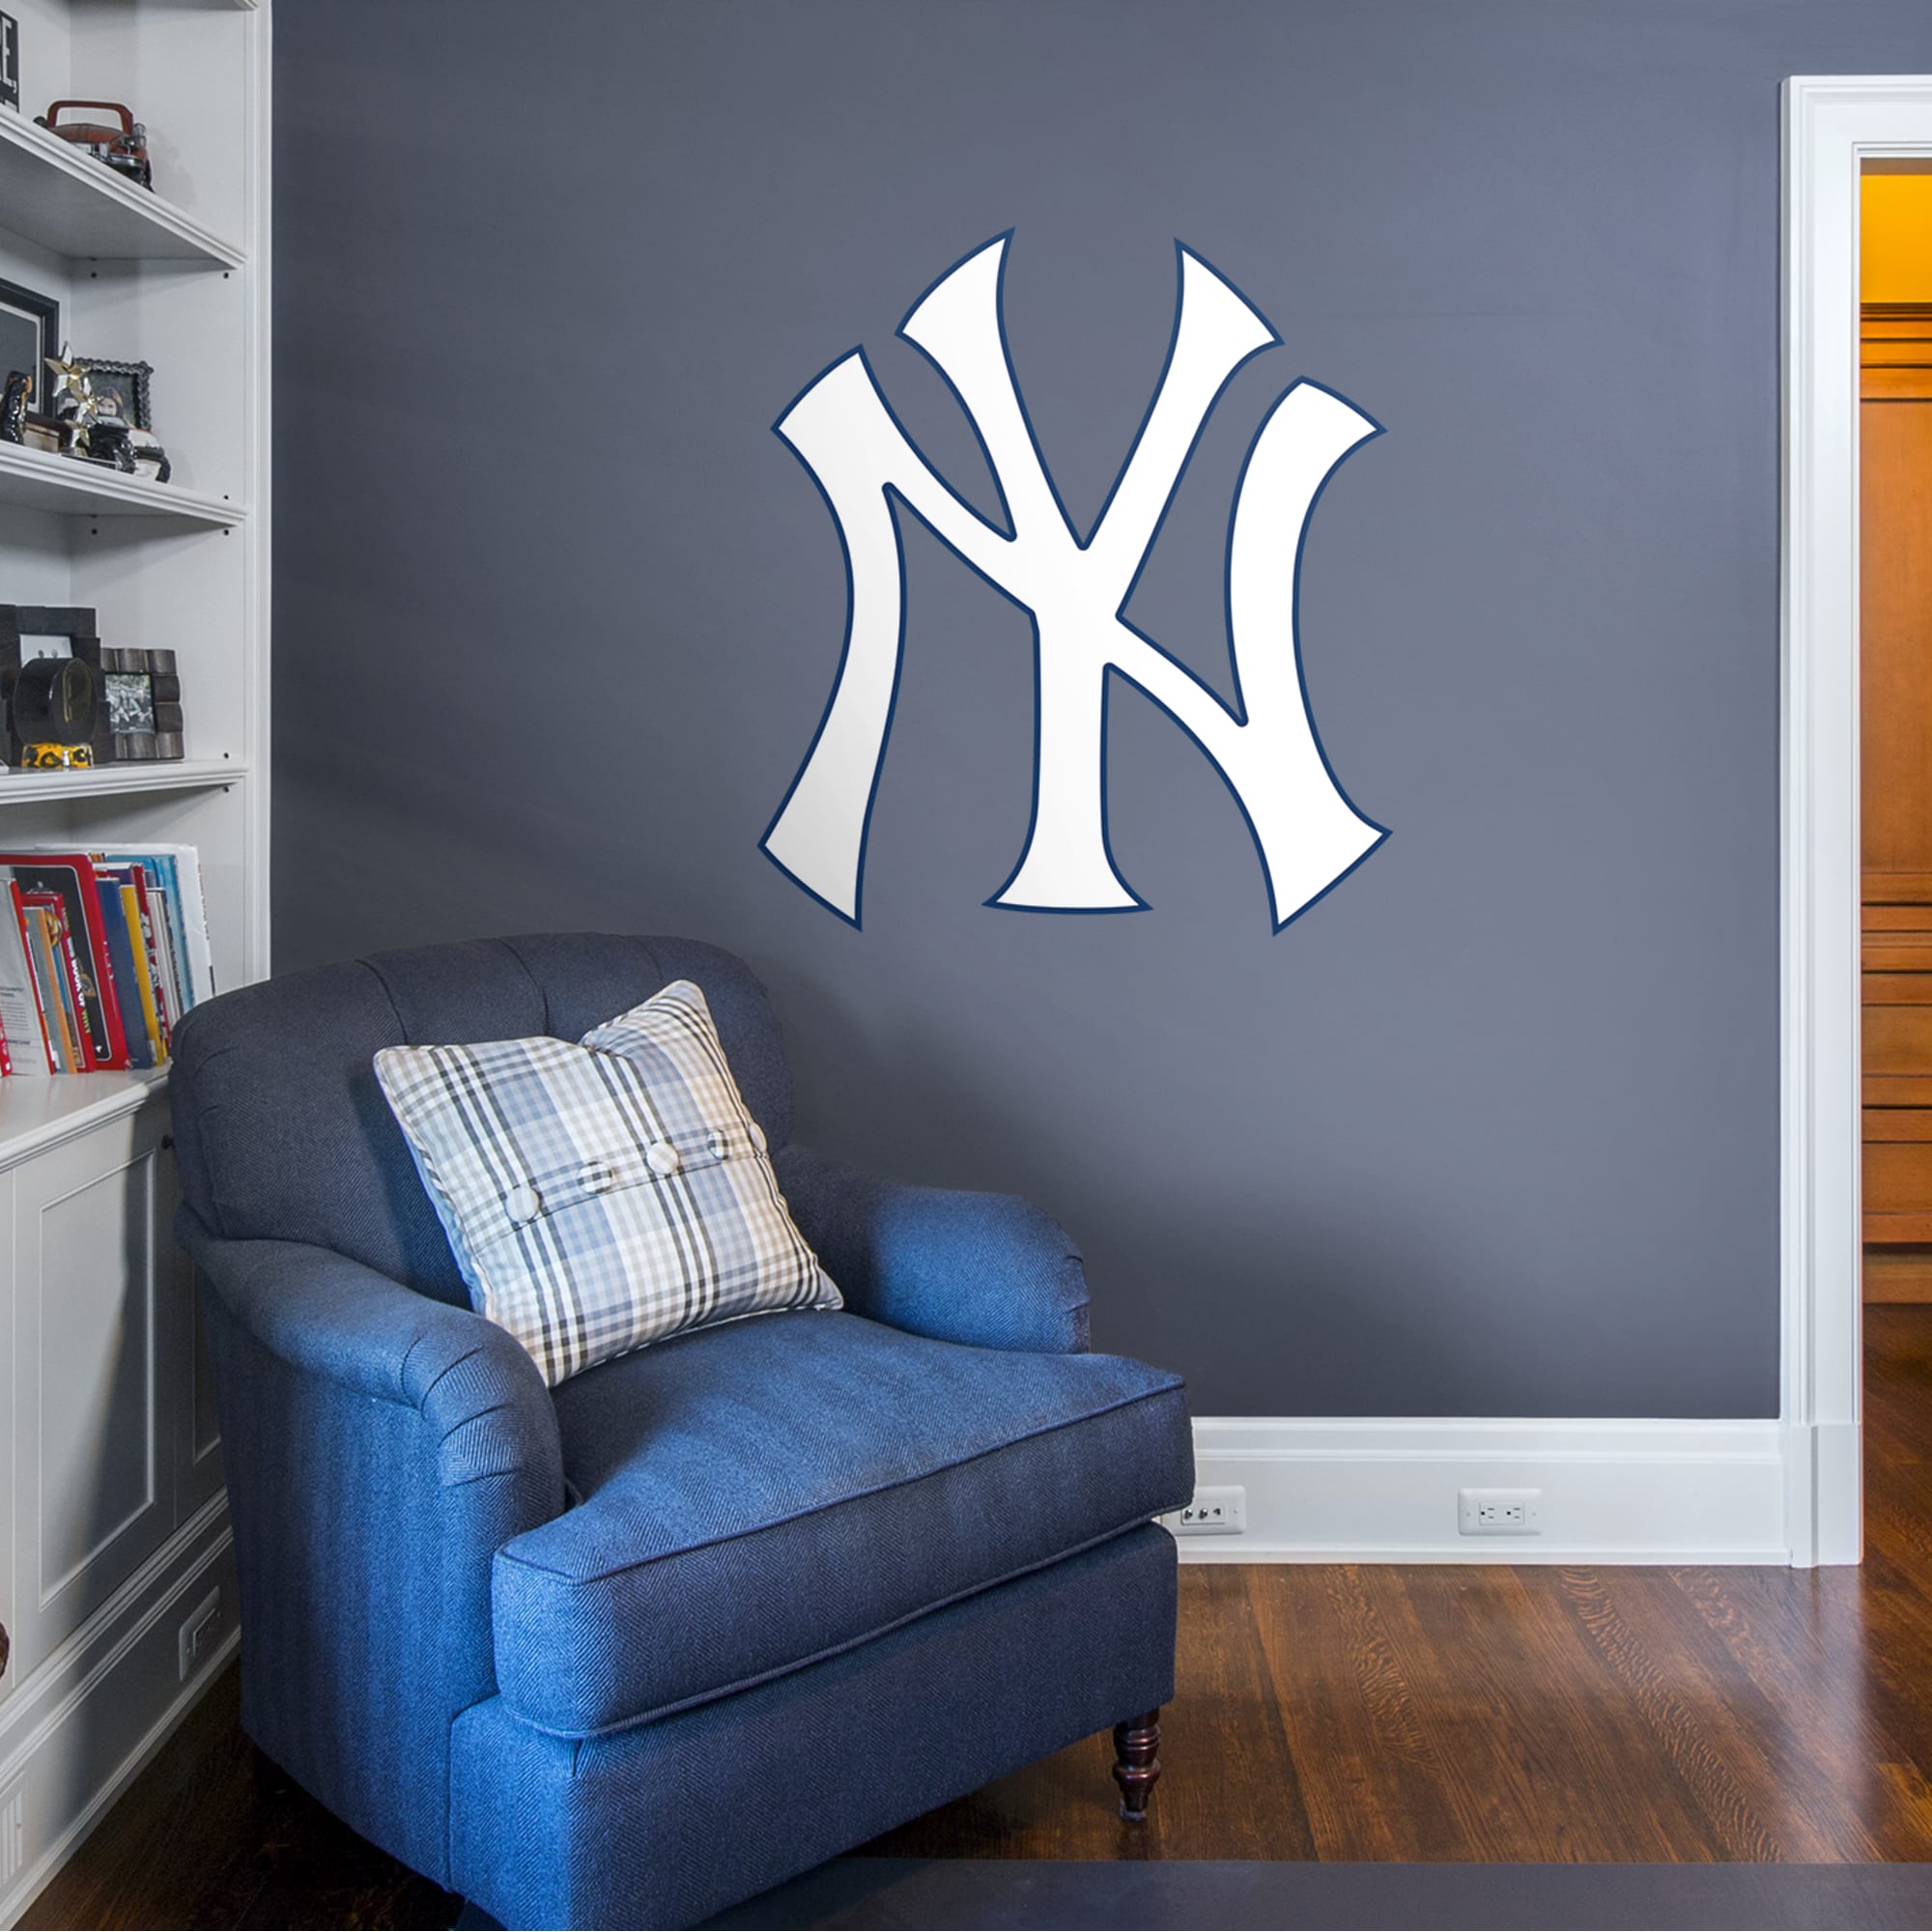 New York Yankees: Logo - Officially Licensed MLB Removable Wall Decal Giant Logo (36"W x 40"H) by Fathead | Vinyl